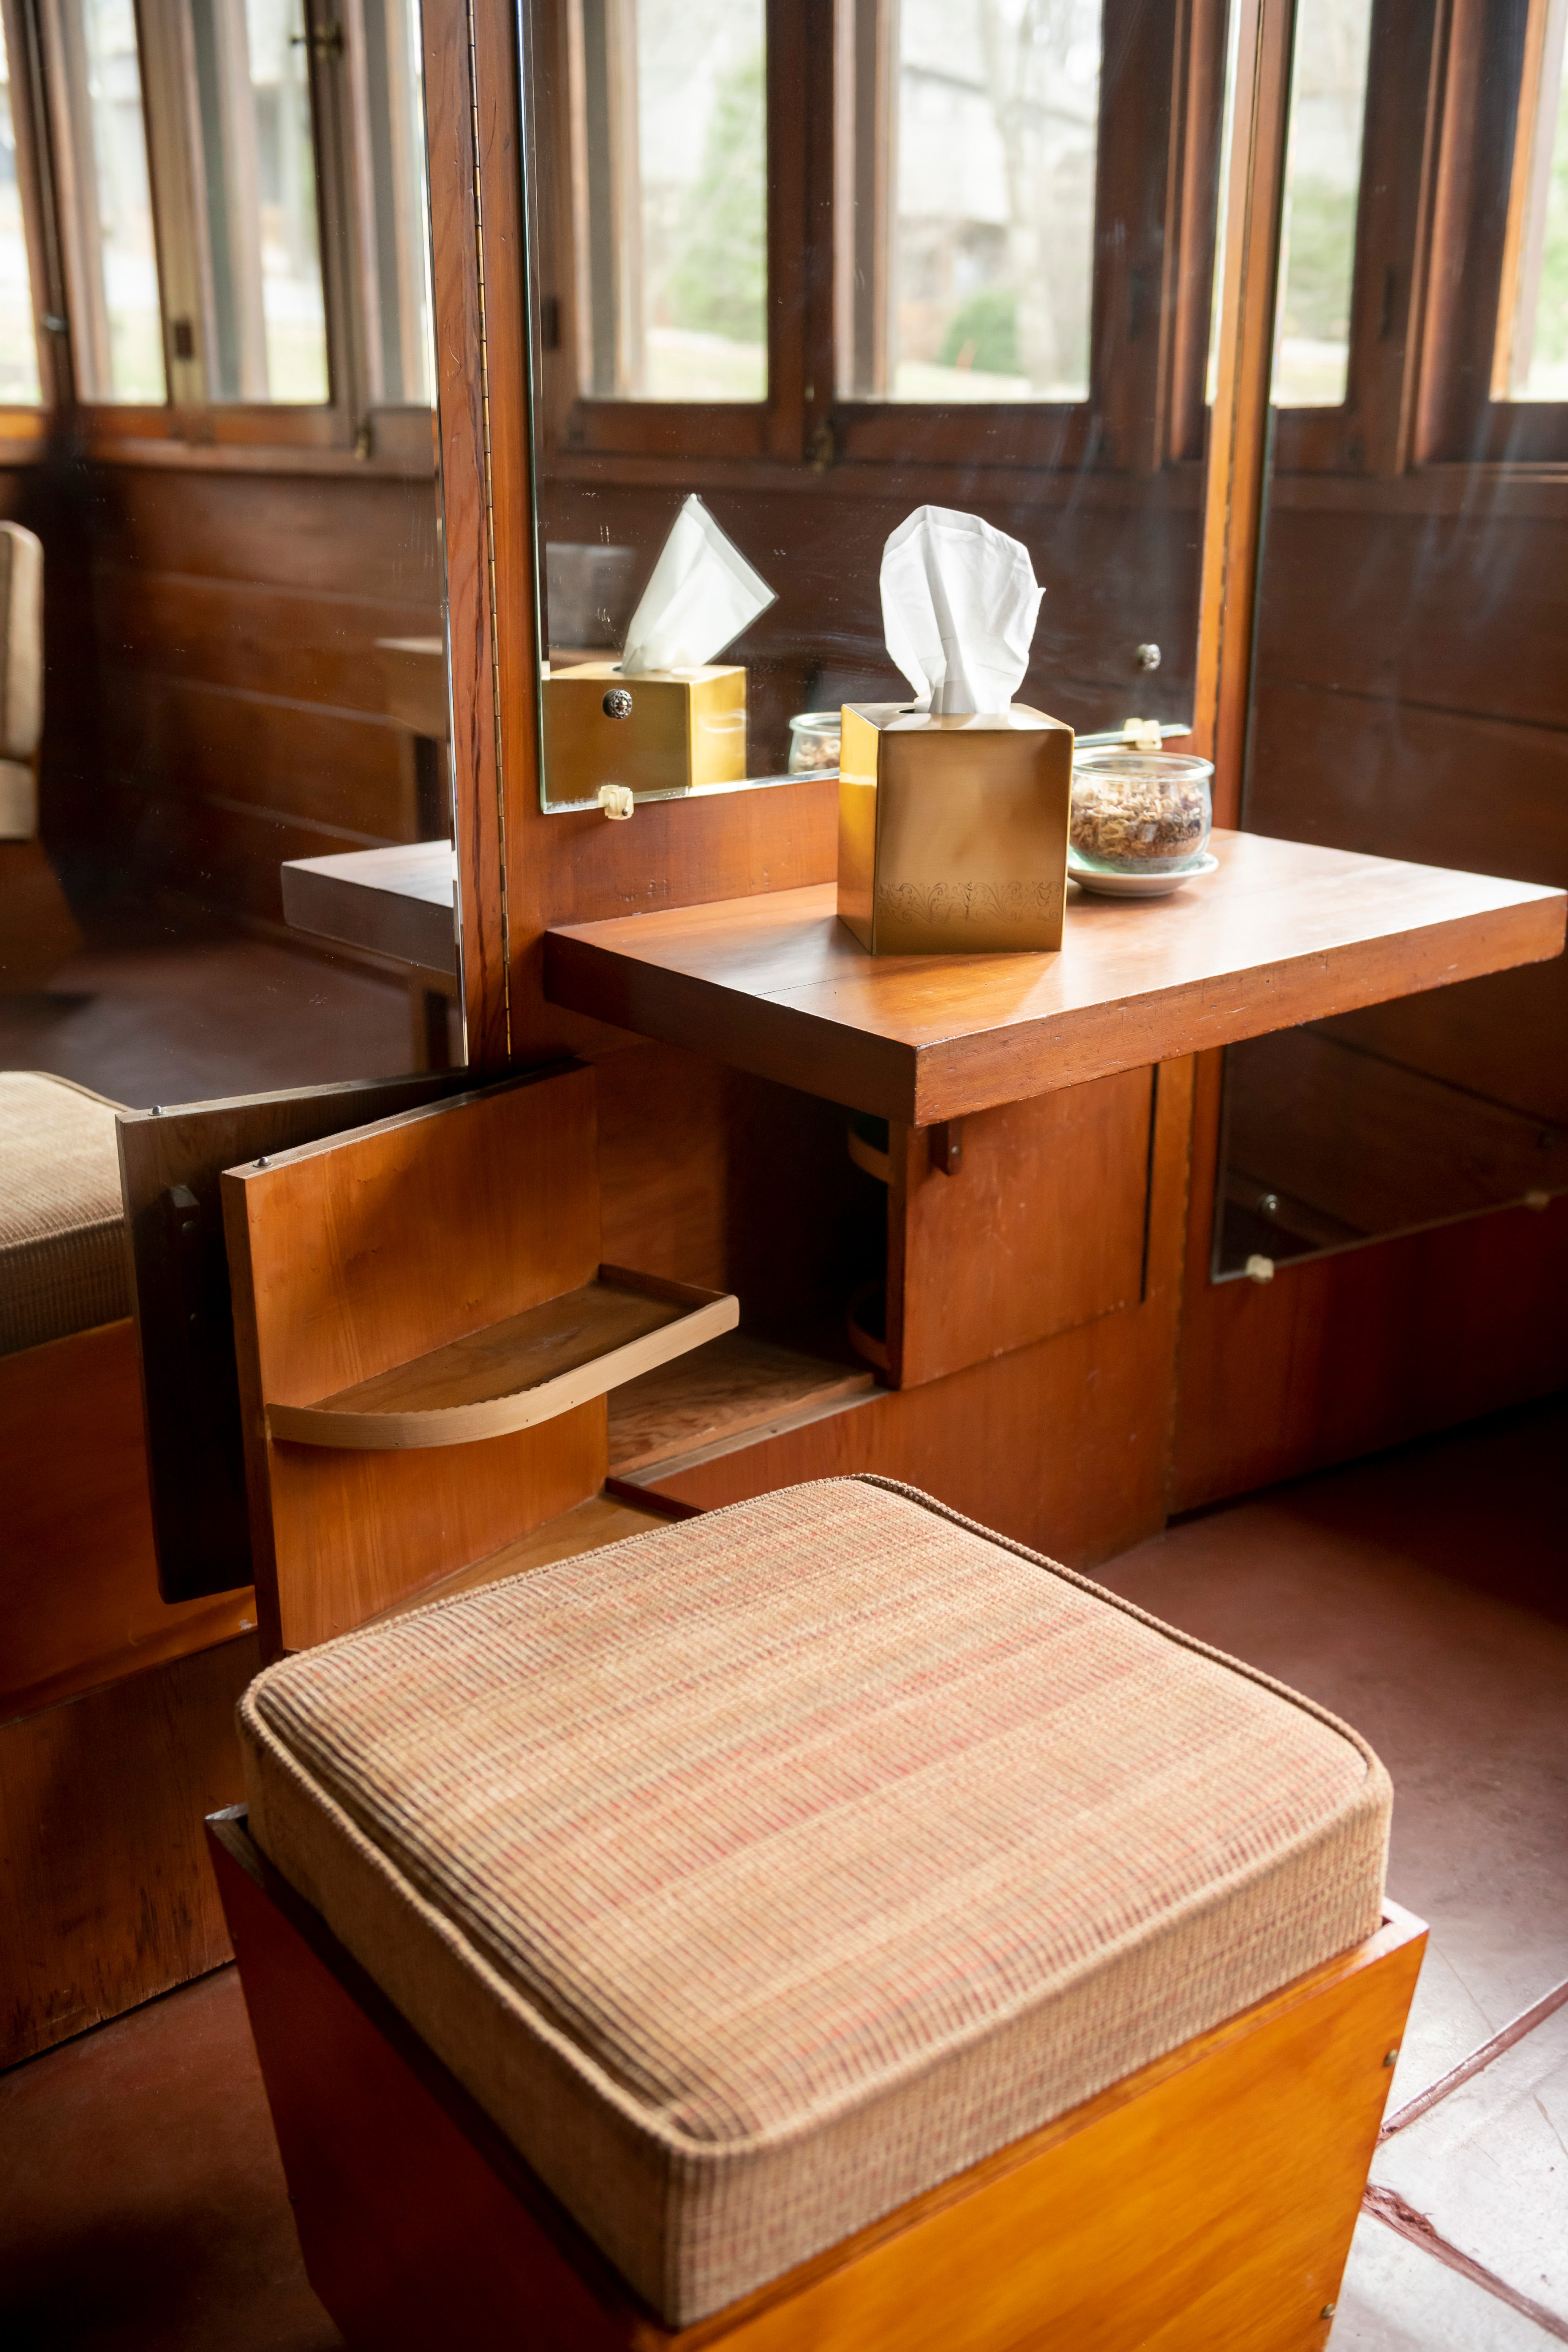 A vanity in the master bedroom includes a hidden storage compartment.